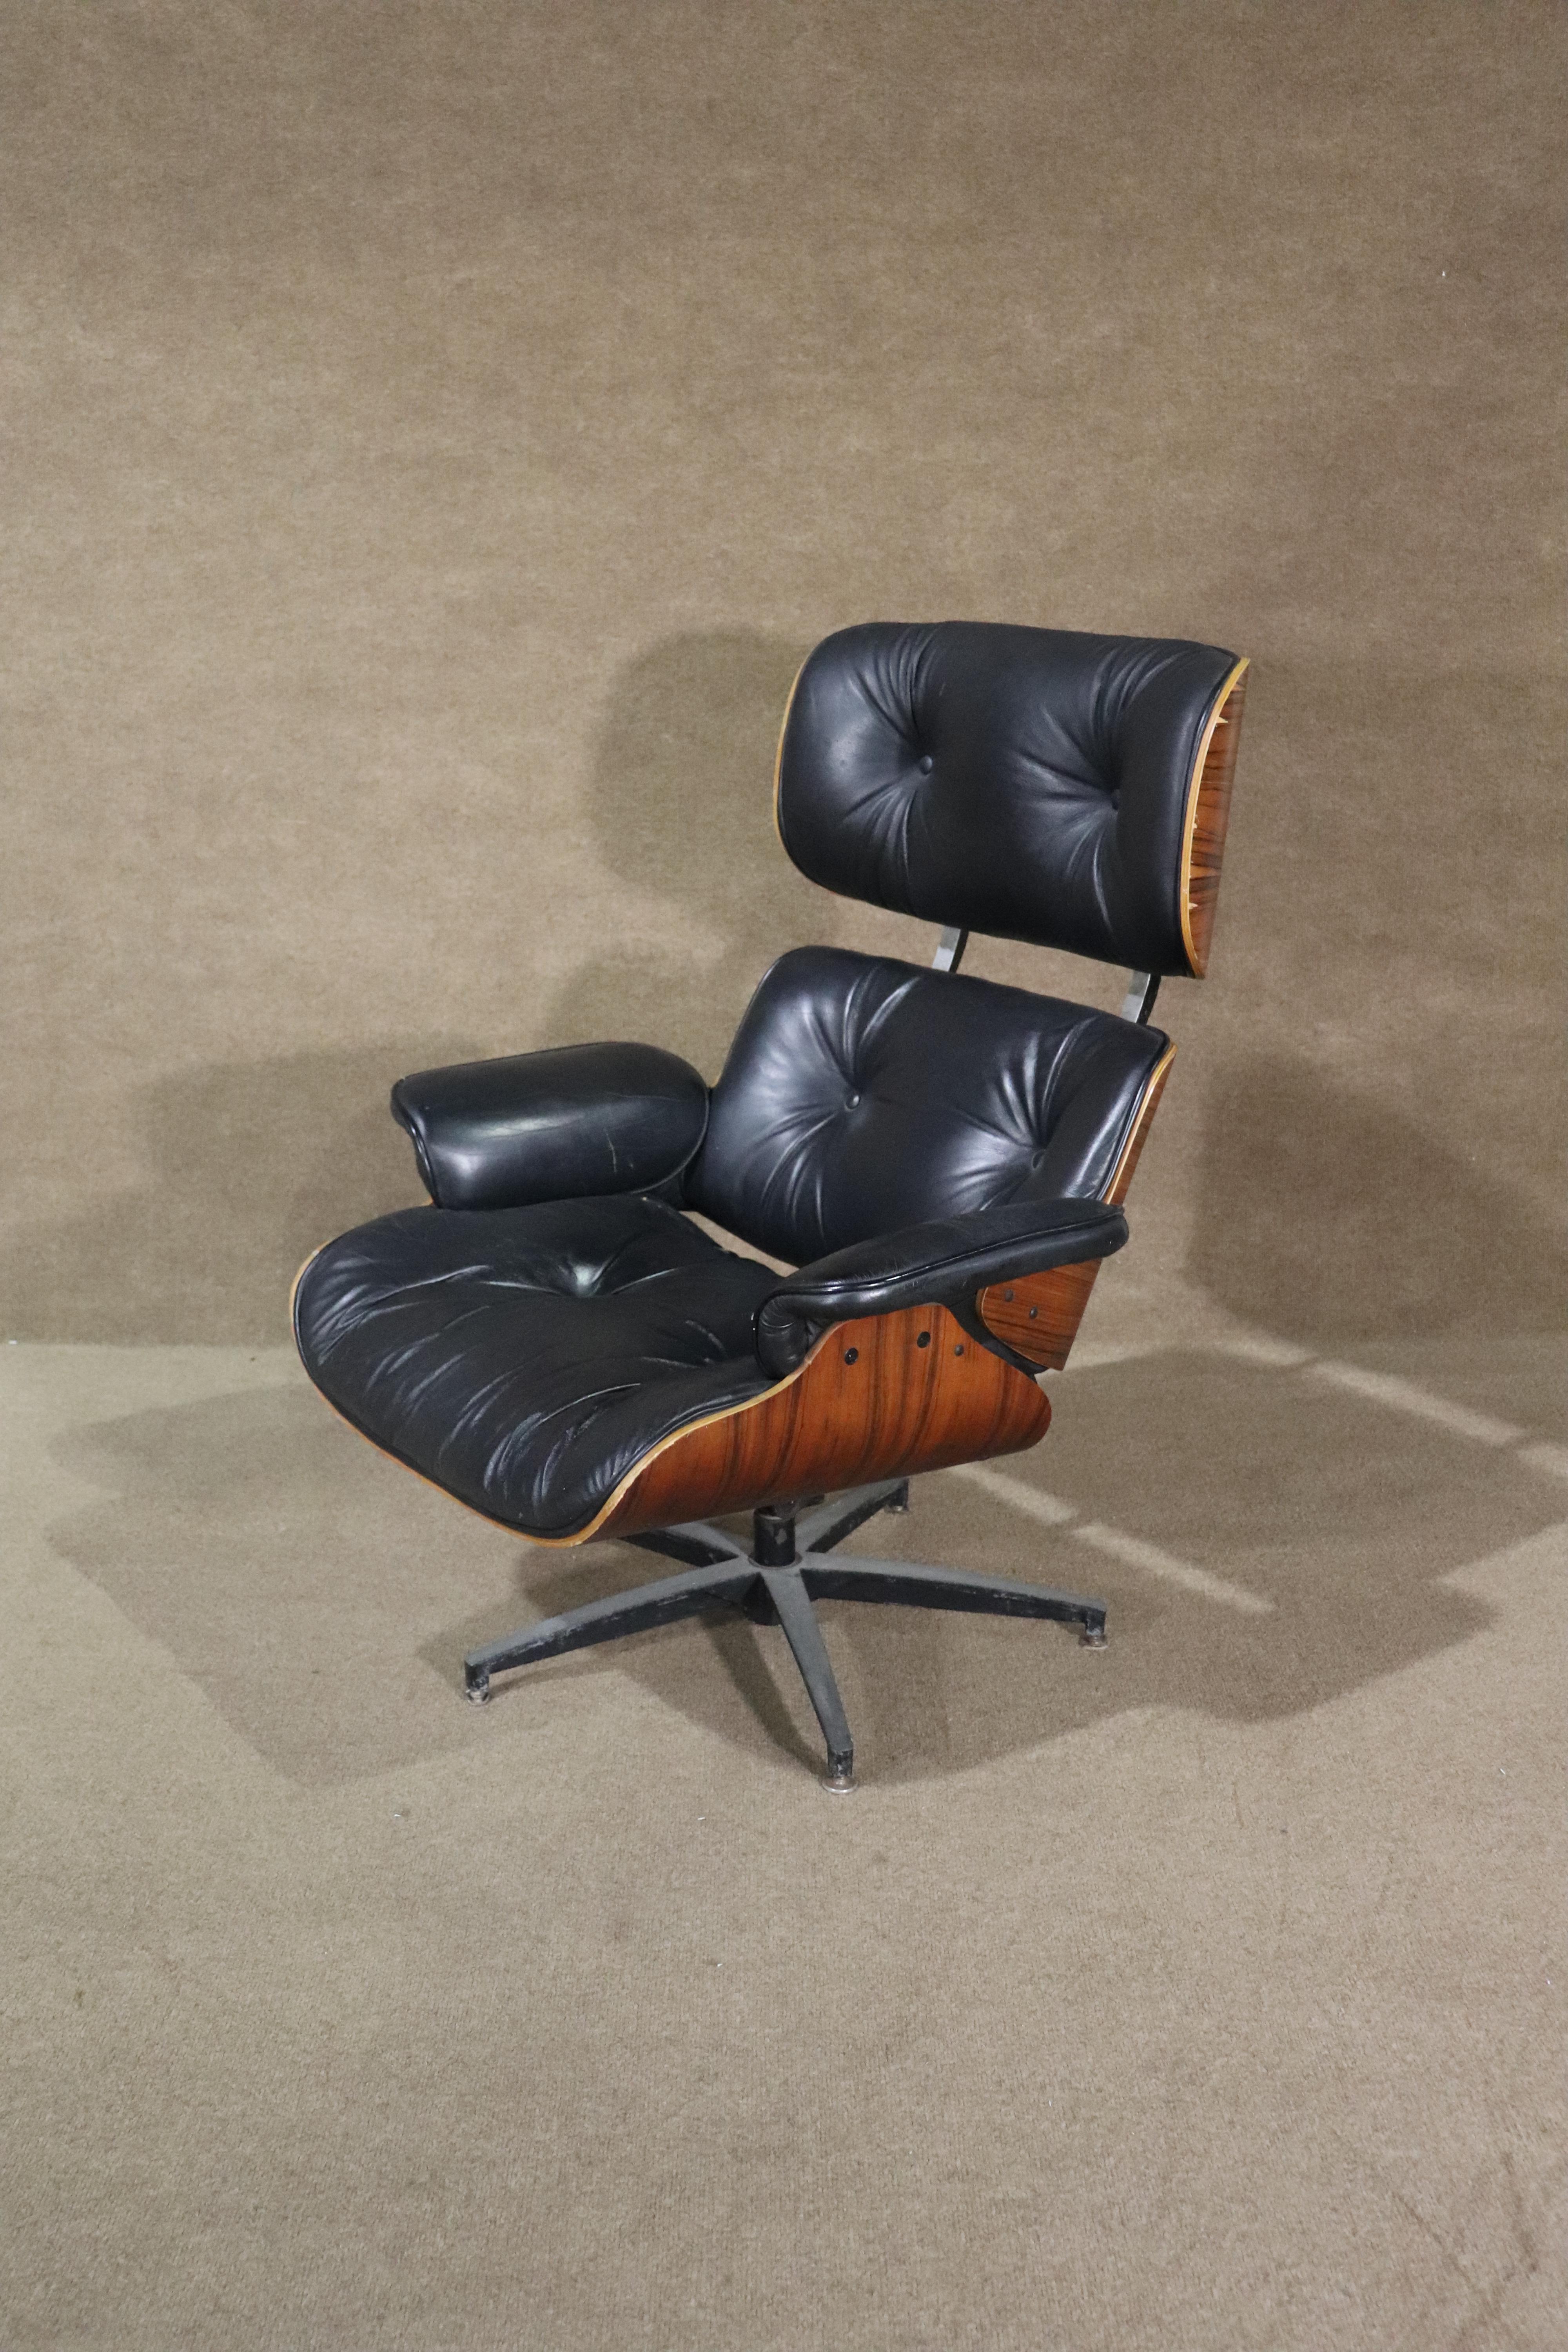 This Eames style lounge chair has all the right lines! Beautiful bent rosewood frame with tufted black leather. Ready for your home or office.
Please confirm location NY or NJ